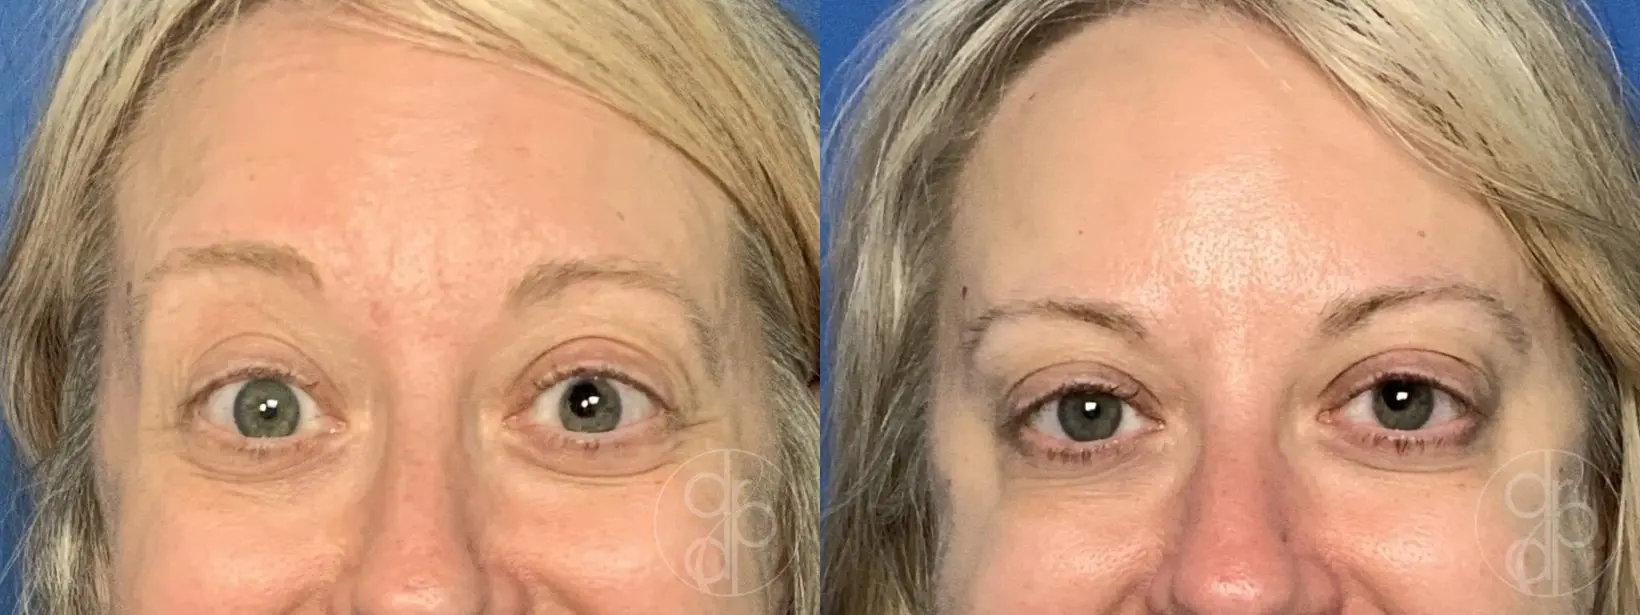 patient 14169 injectables before and after result - Before and After 4